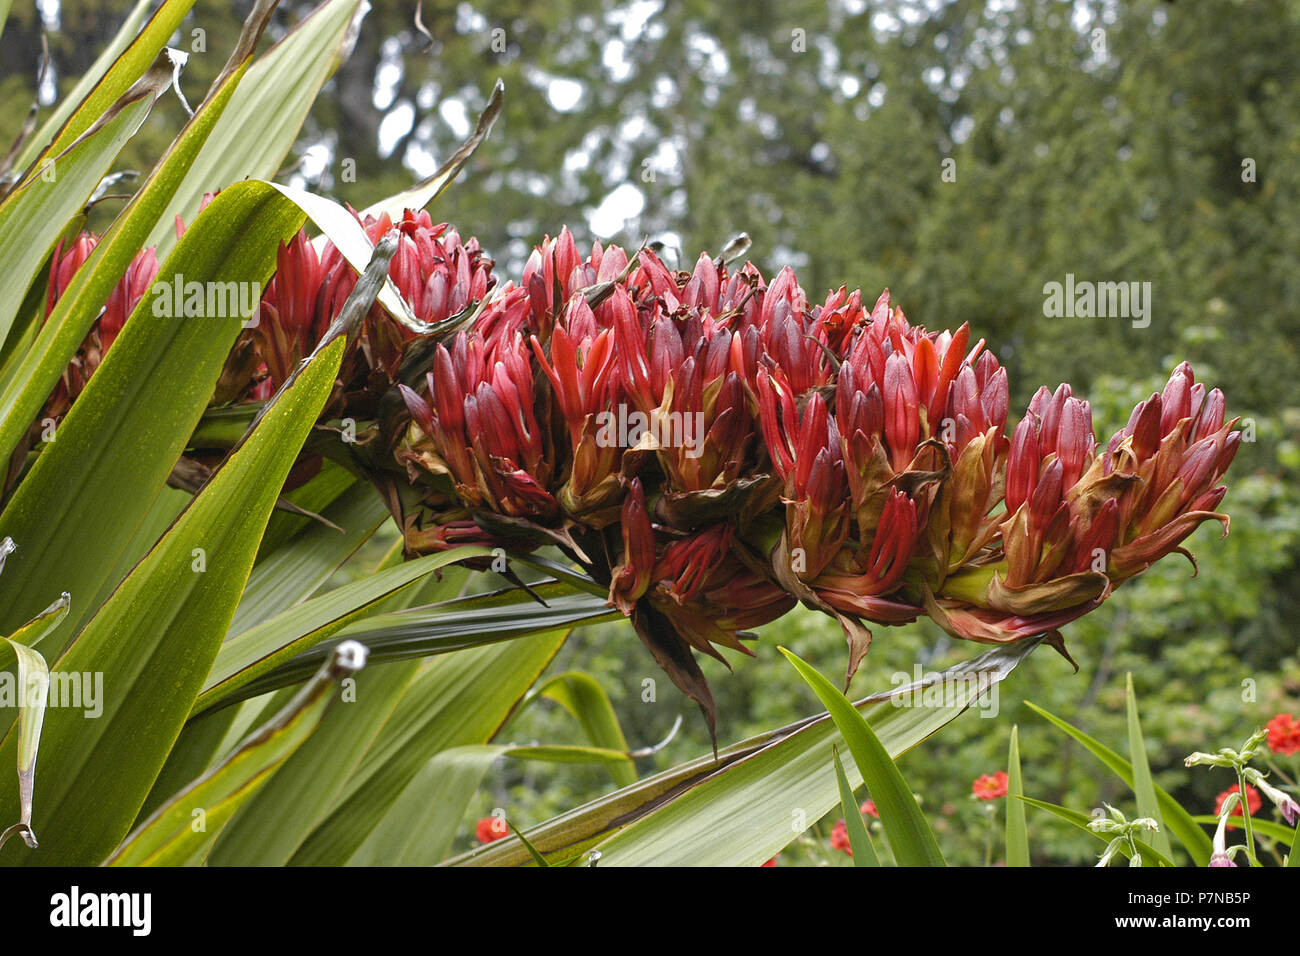 Doryanthes palmeri, commonly called the giant spear lily, Shoal Bay area, New South Wales, Australia Stock Photo